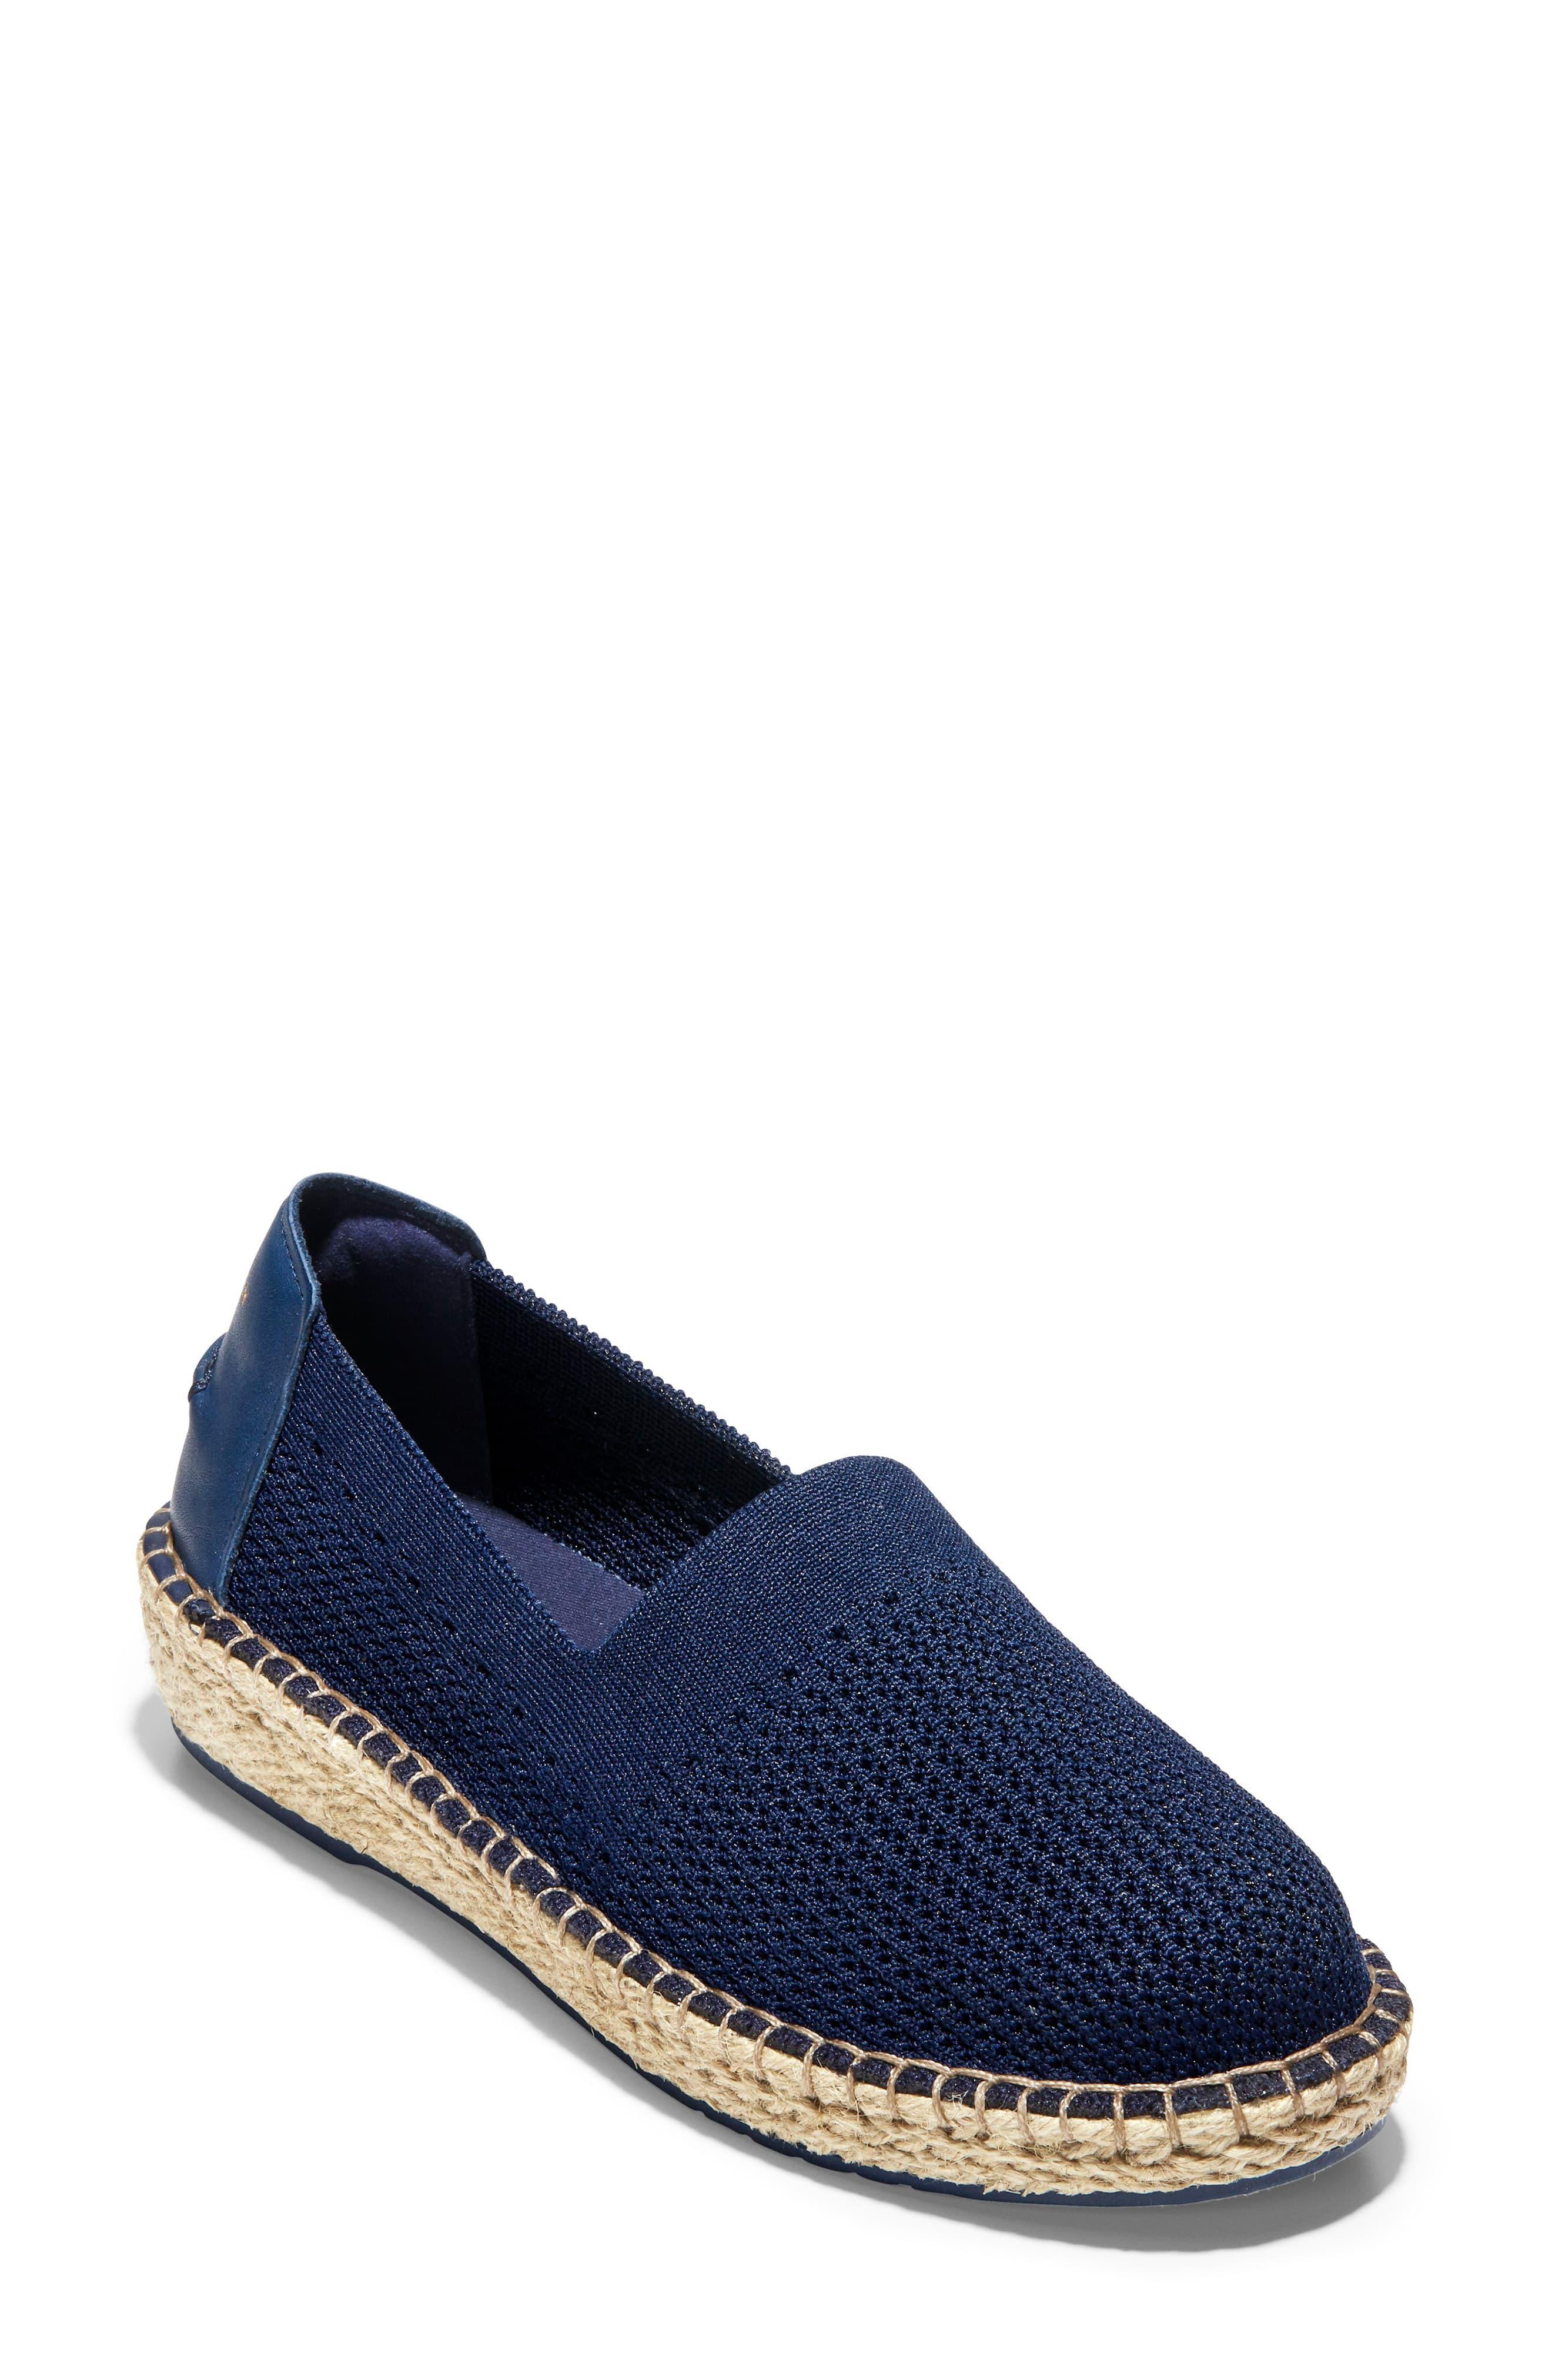 Cole Haan Cloudfeel Stitchlite Espadrille in Blue - Lyst